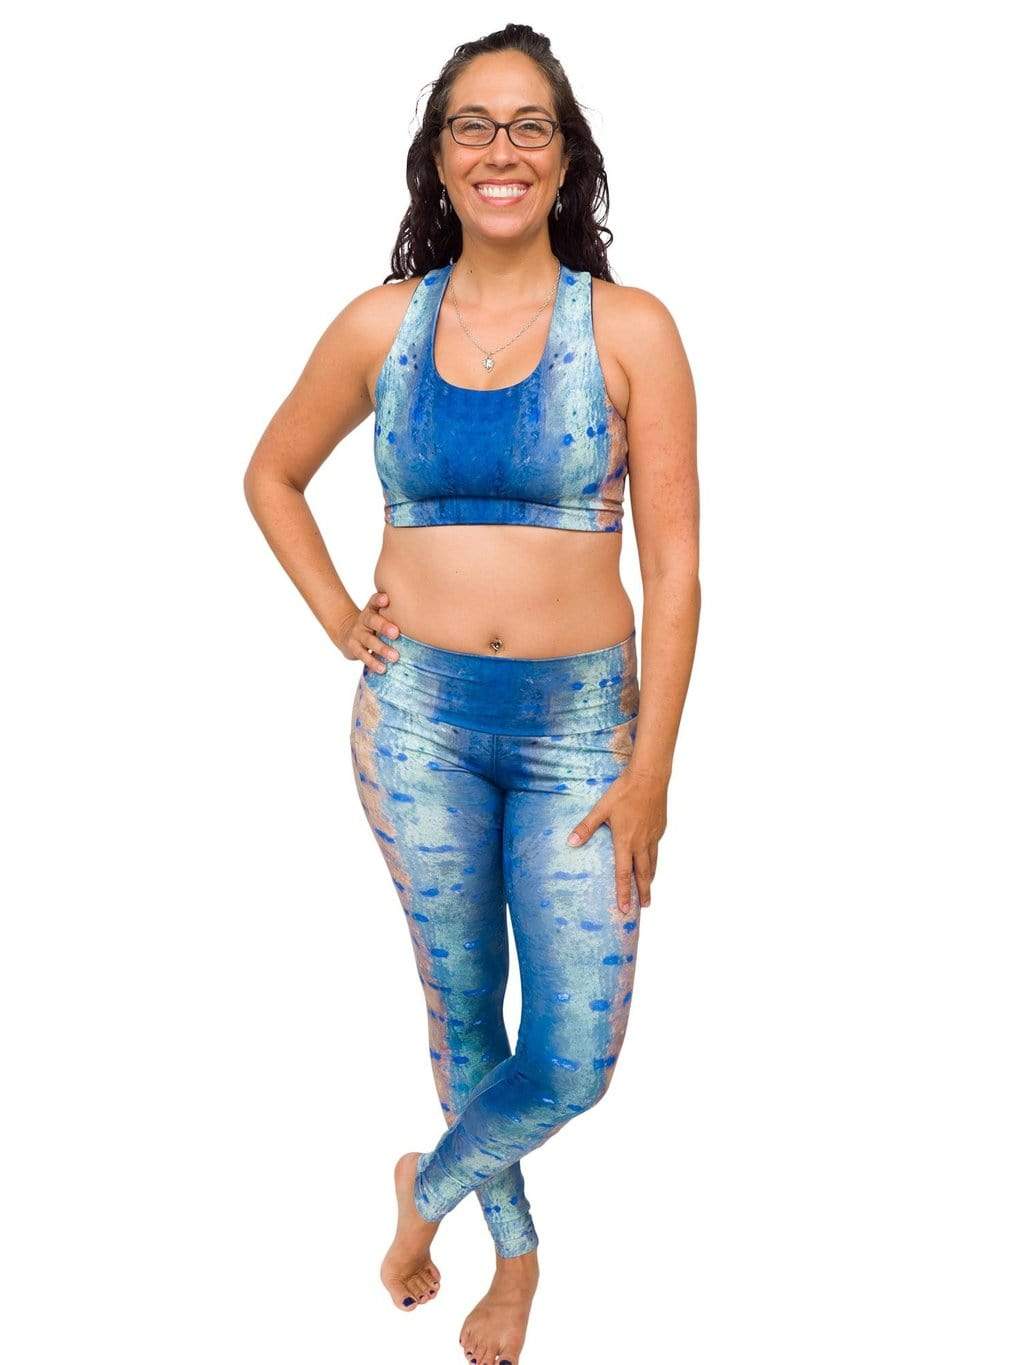 Model: Ana is an avid scuba diver, as well as mooring buoy volunteer for Biscayne National Park. She is 5&#39;9&quot;, 170 lbs, 36B and is wearing a M top and L legging.